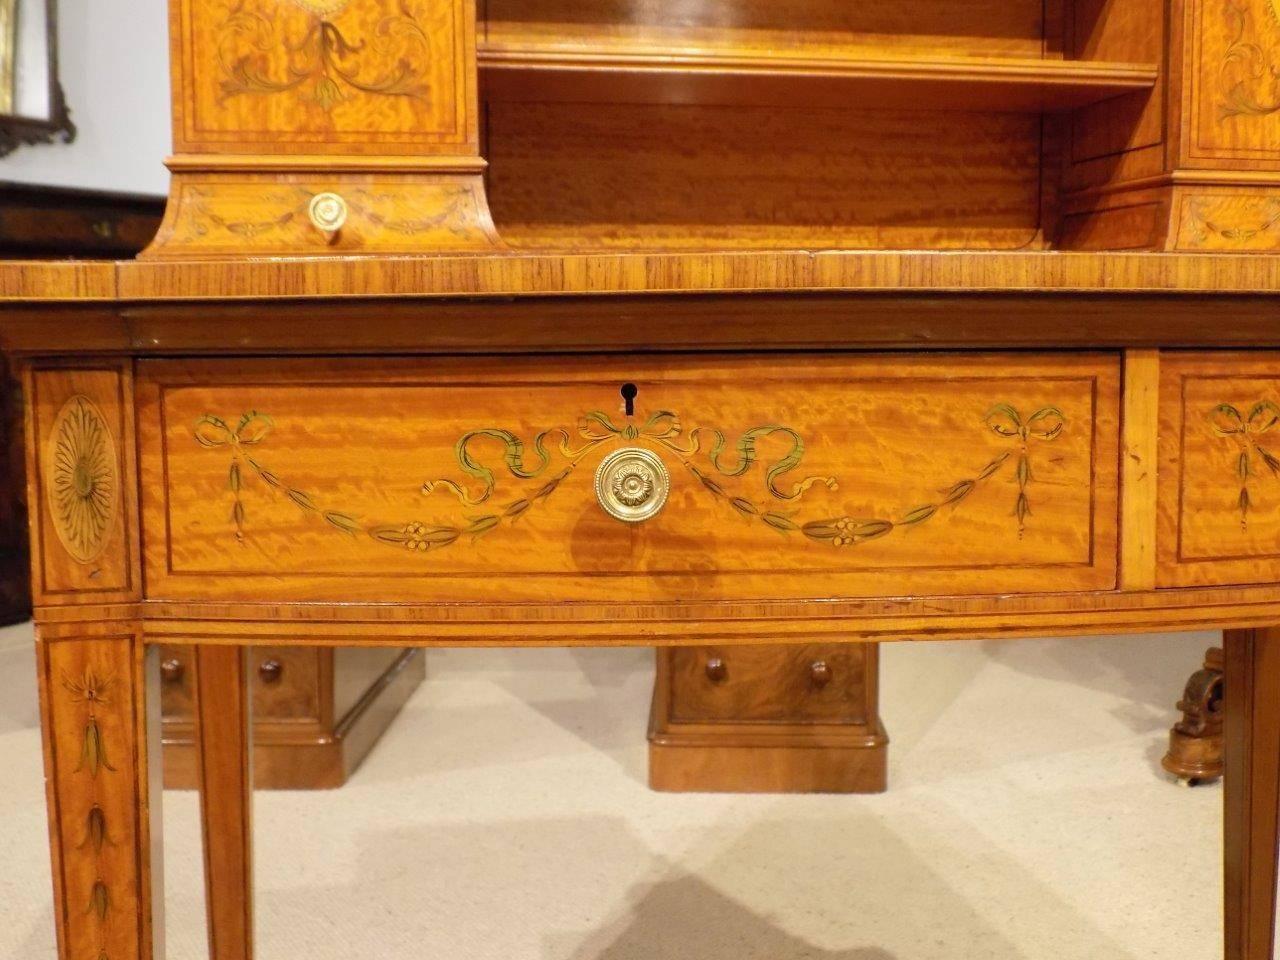 A fine quality satinwood Victorian period ladies writing table. The upper section having brass galleries, two open shelves, two marquetry inlaid compartments and twin shaped small drawers with fine ribbon, swag and urn inlaid detail. The lower